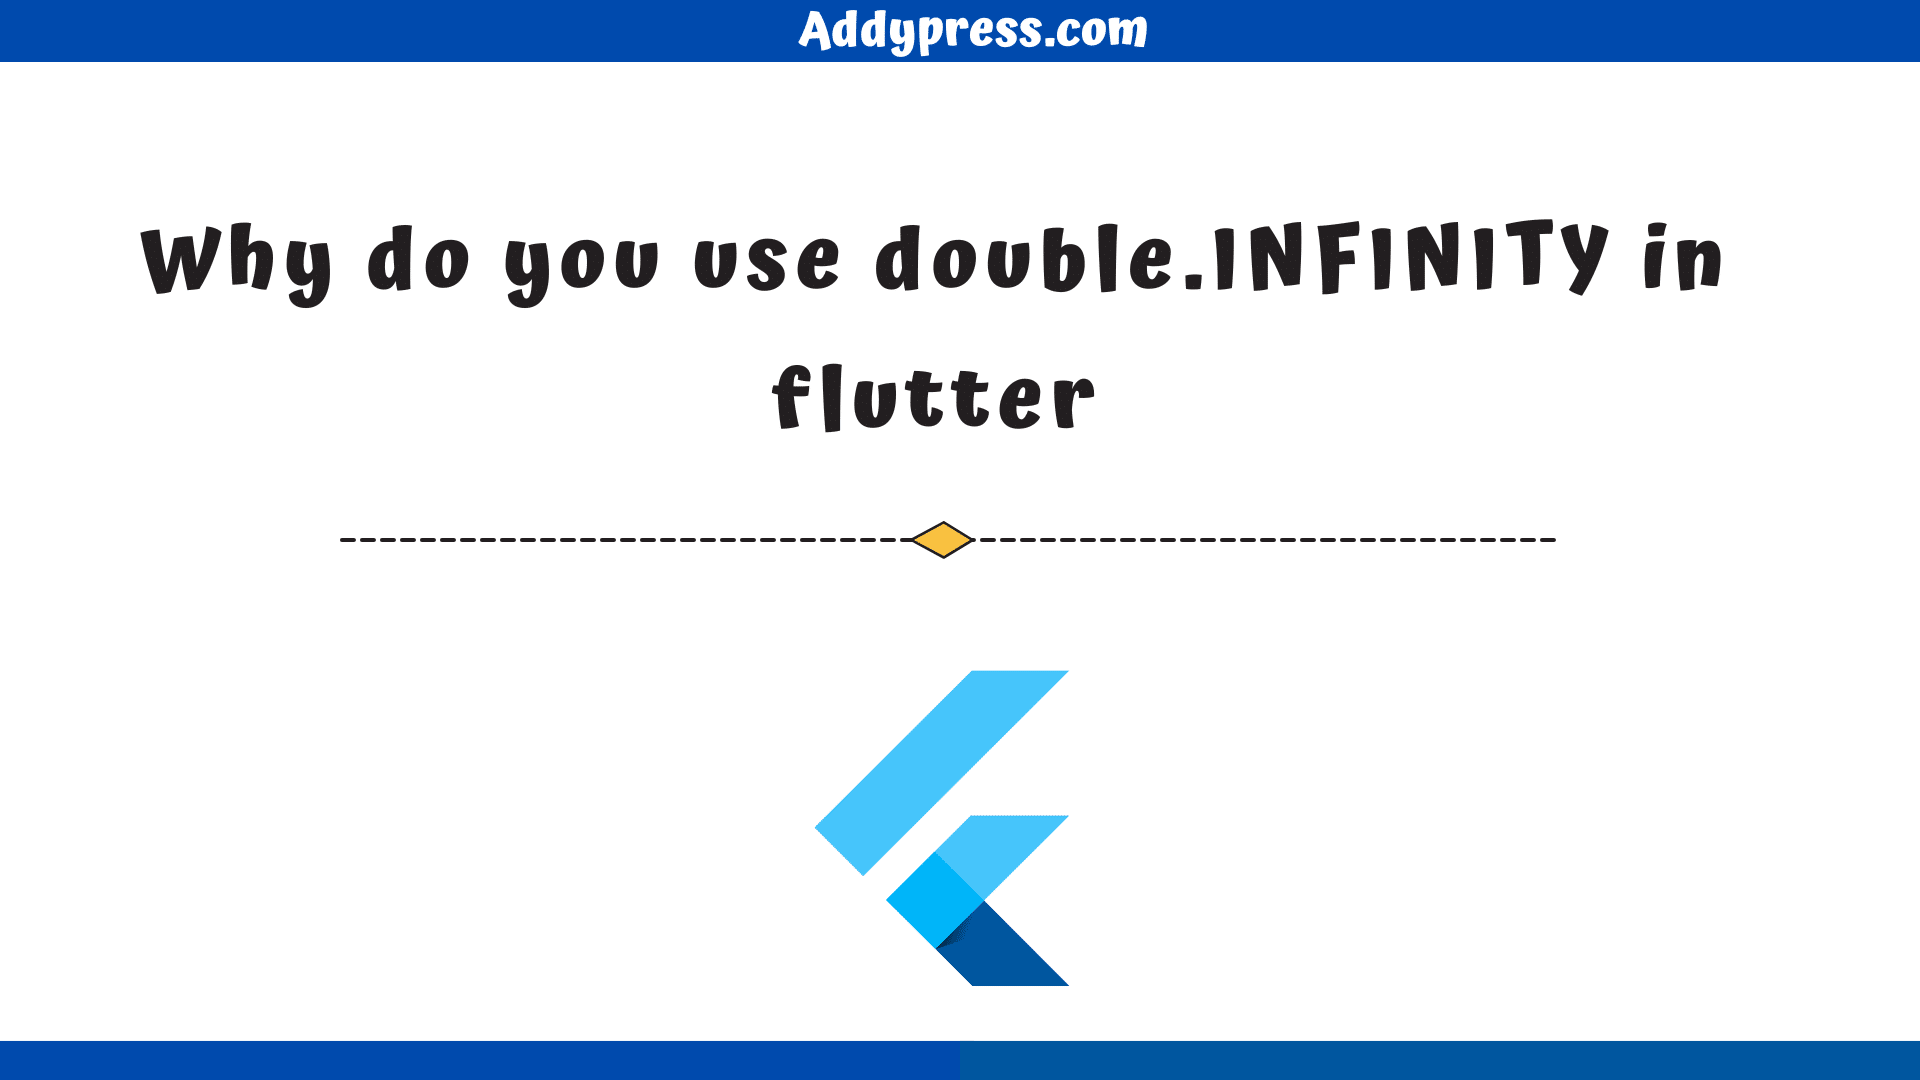 Why do you use double.INFINITY in flutter